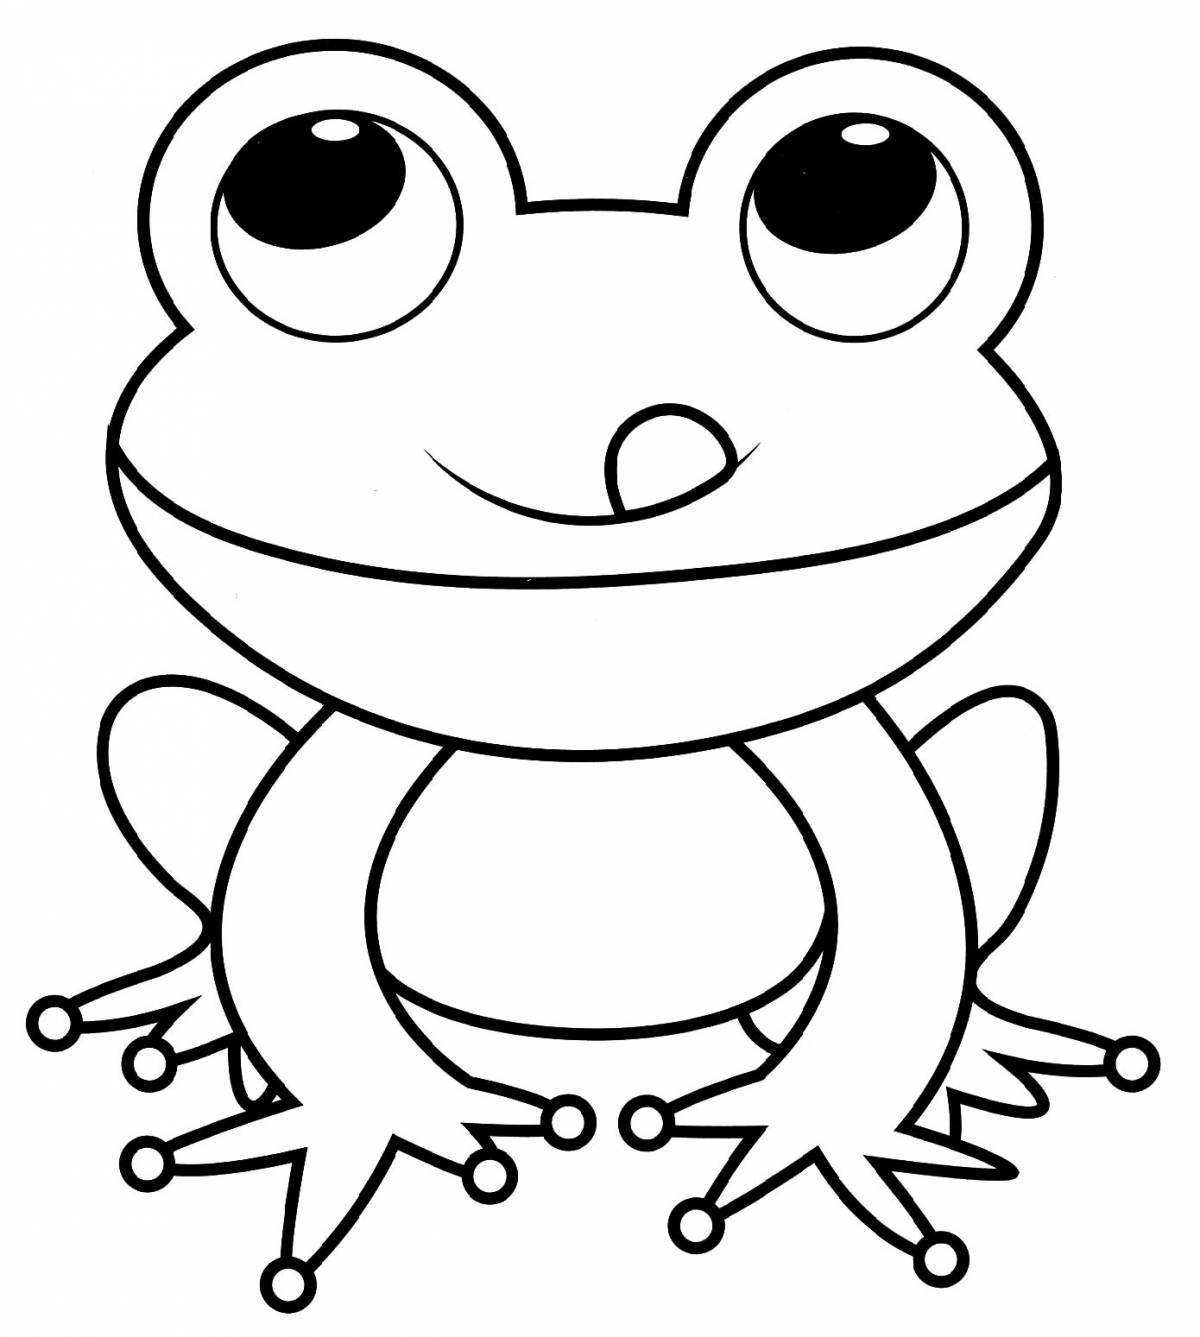 Exquisite toad coloring book for kids